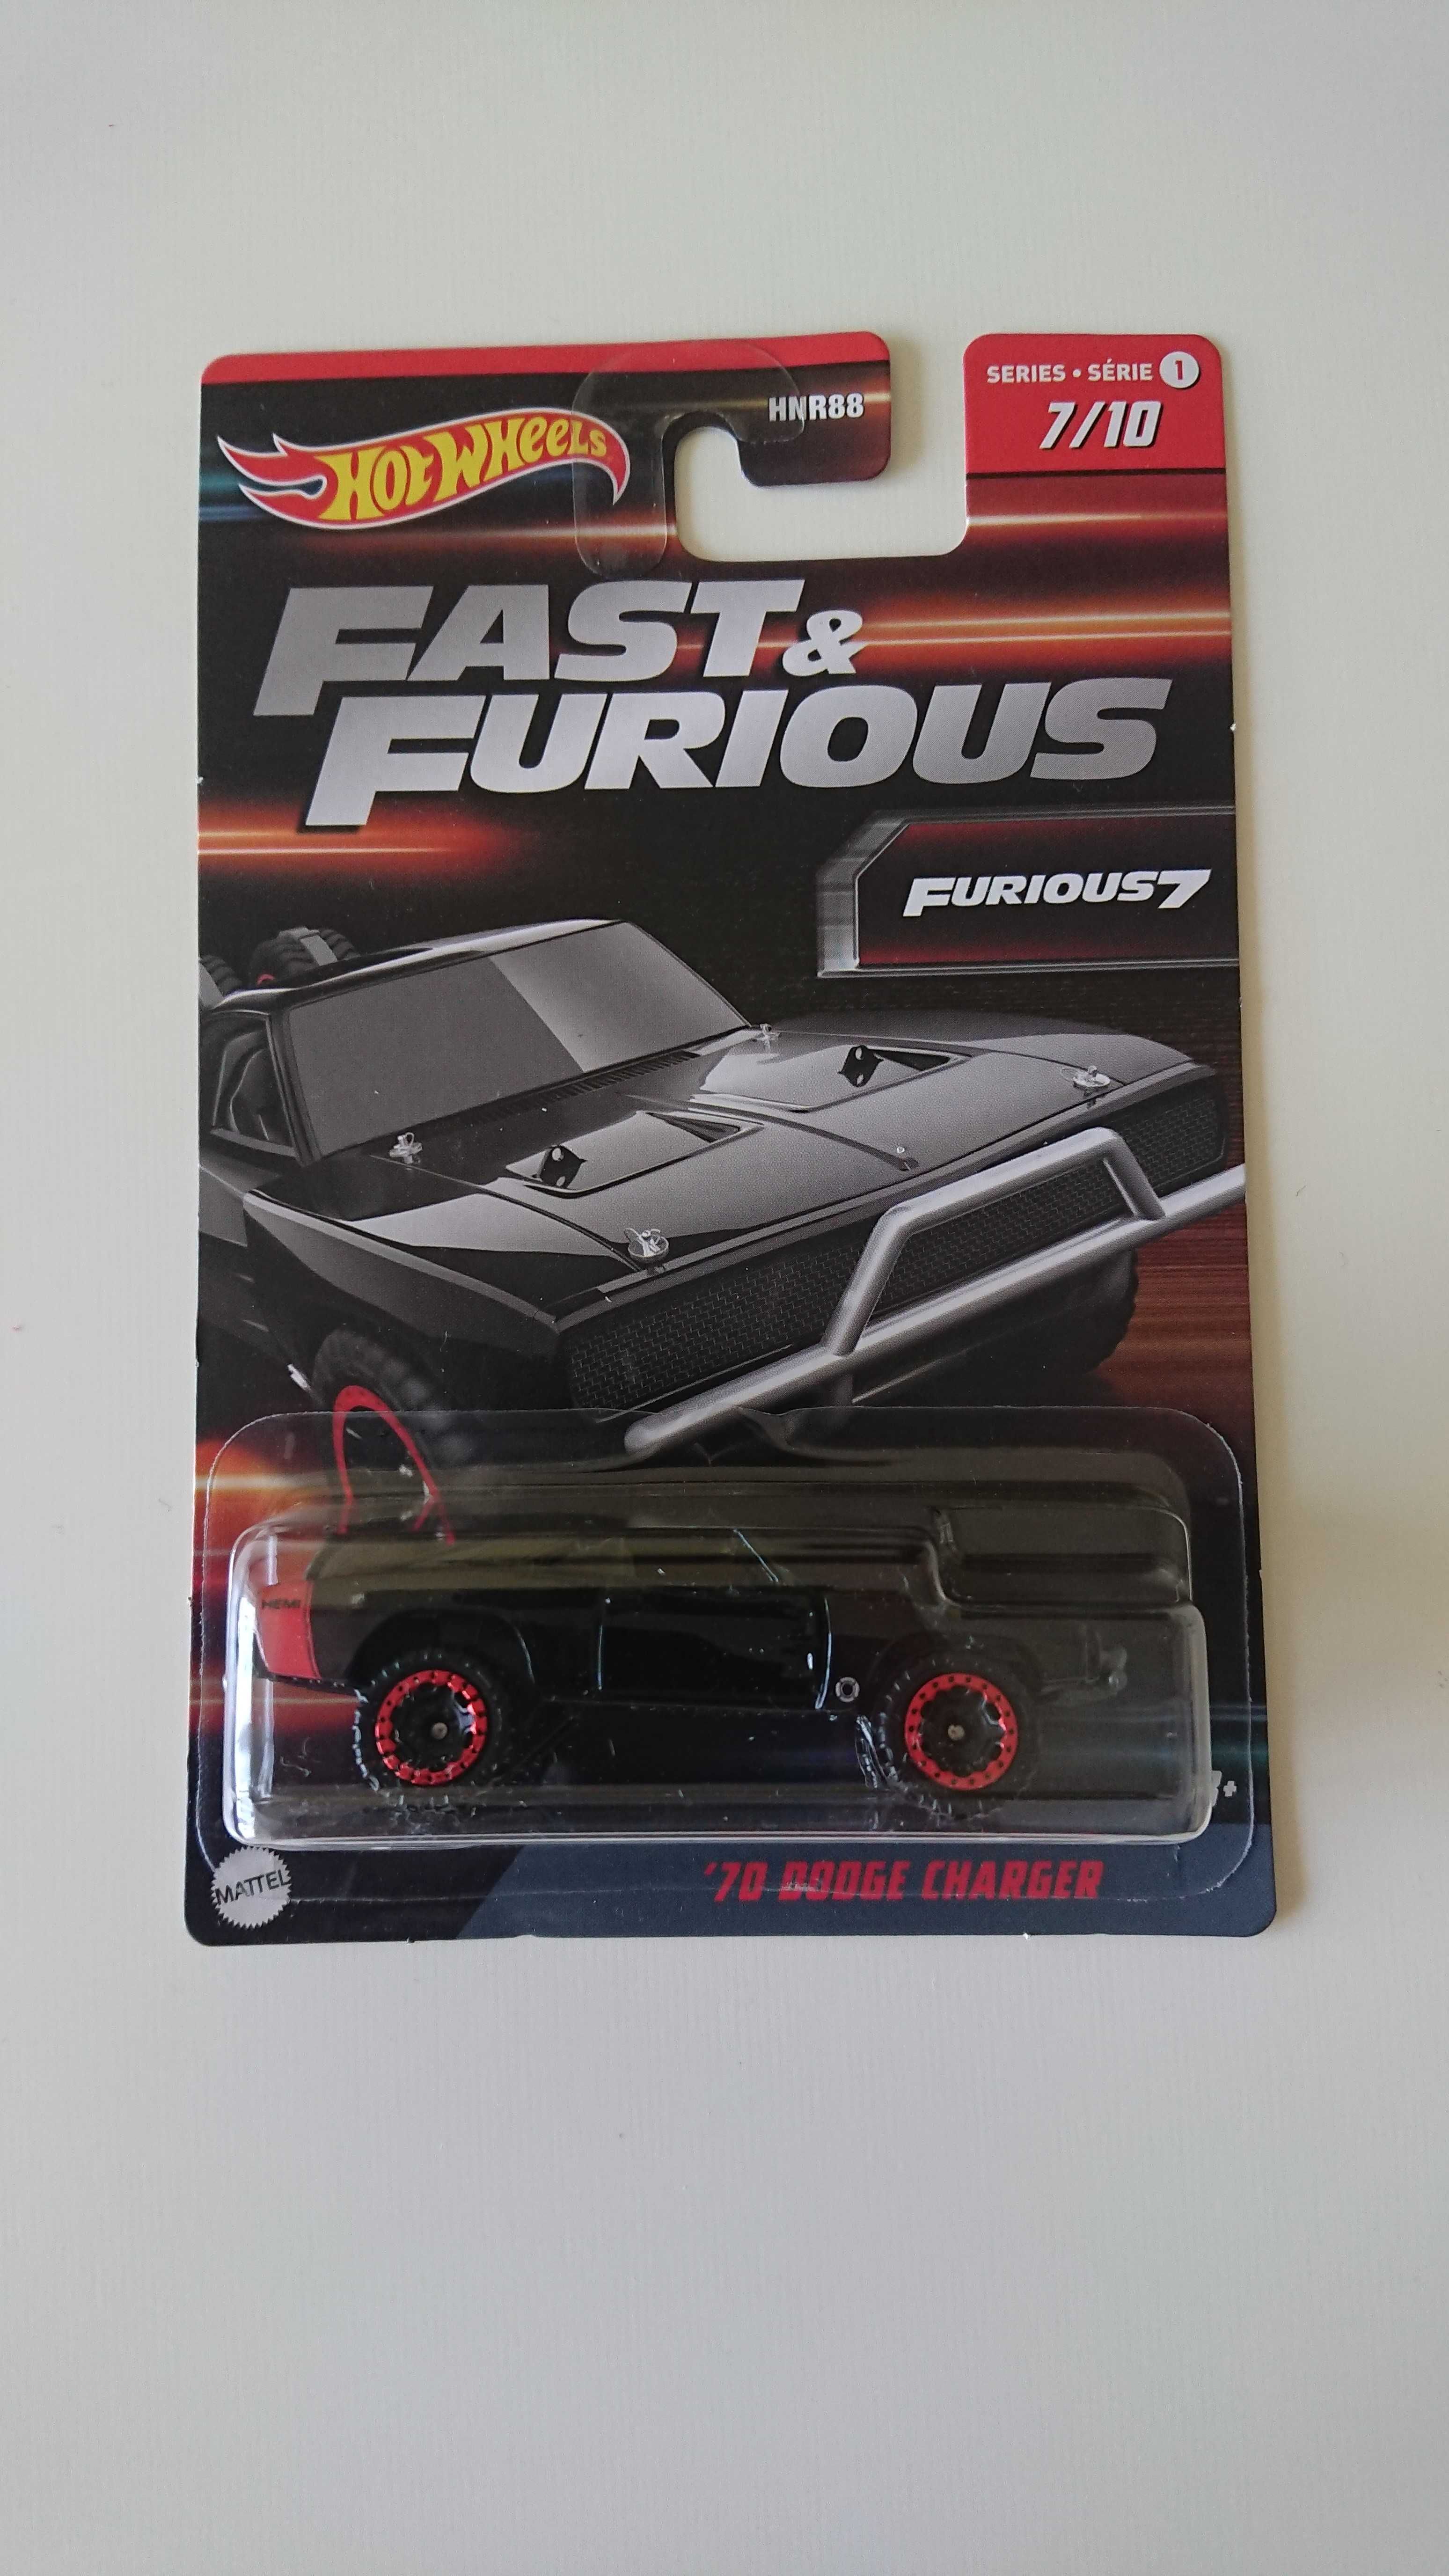 Hot Wheels '70 Dodge Charger Fast Furious 7 HNR97-ND710 (1)